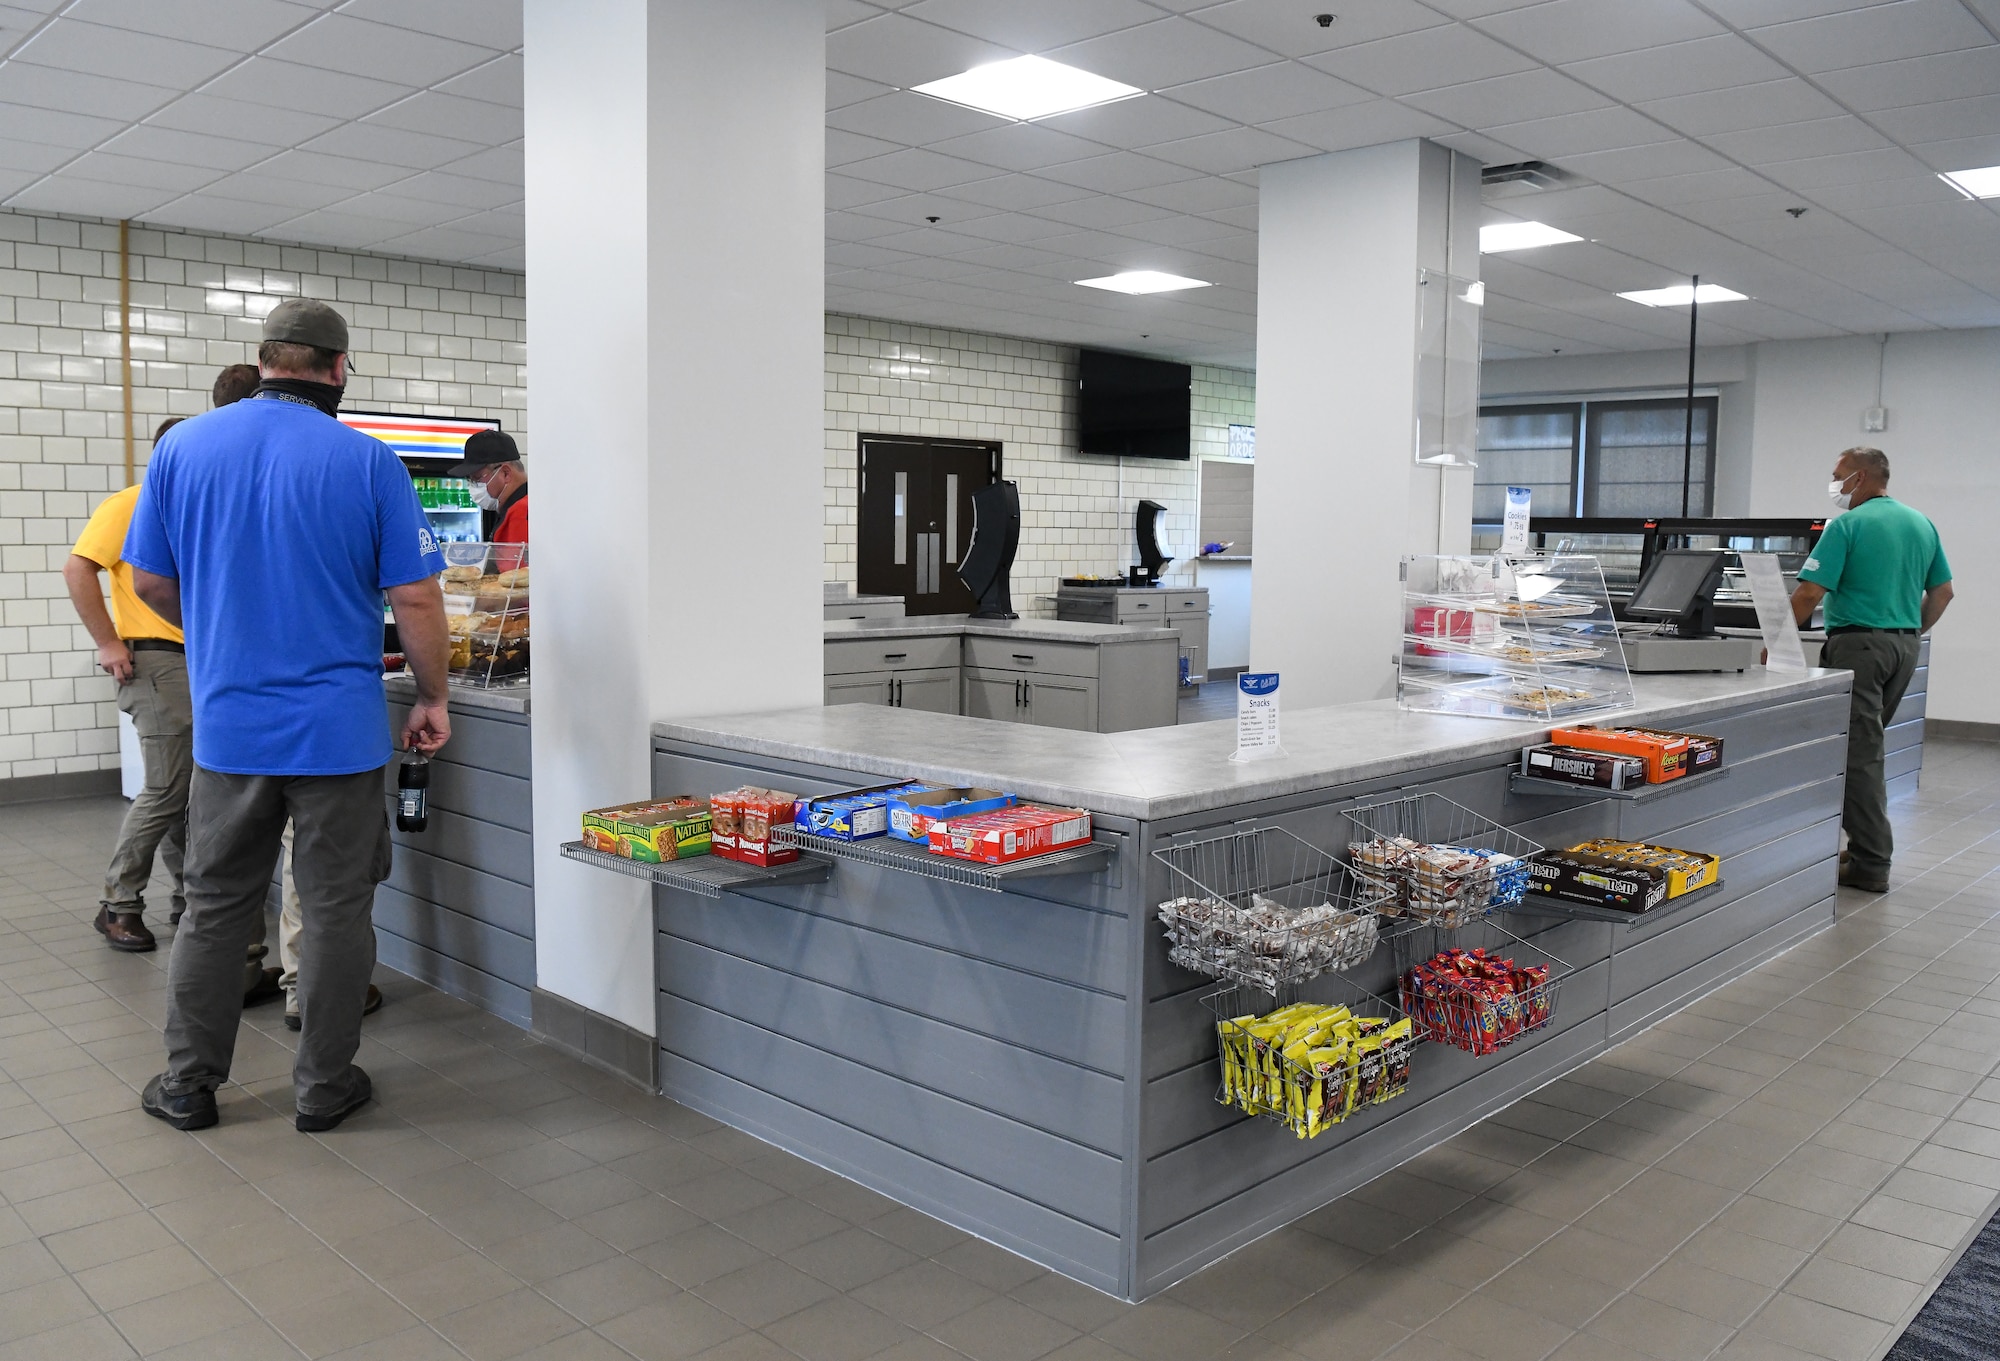 During a months-long closure of Café 100, the dining facility was renovated and the layout changed to allow more grab-and-go items to reduce wait times for customers. Café 100 reopened Sept. 9, 2021. (U.S. Air Force photo by Jill Pickett)